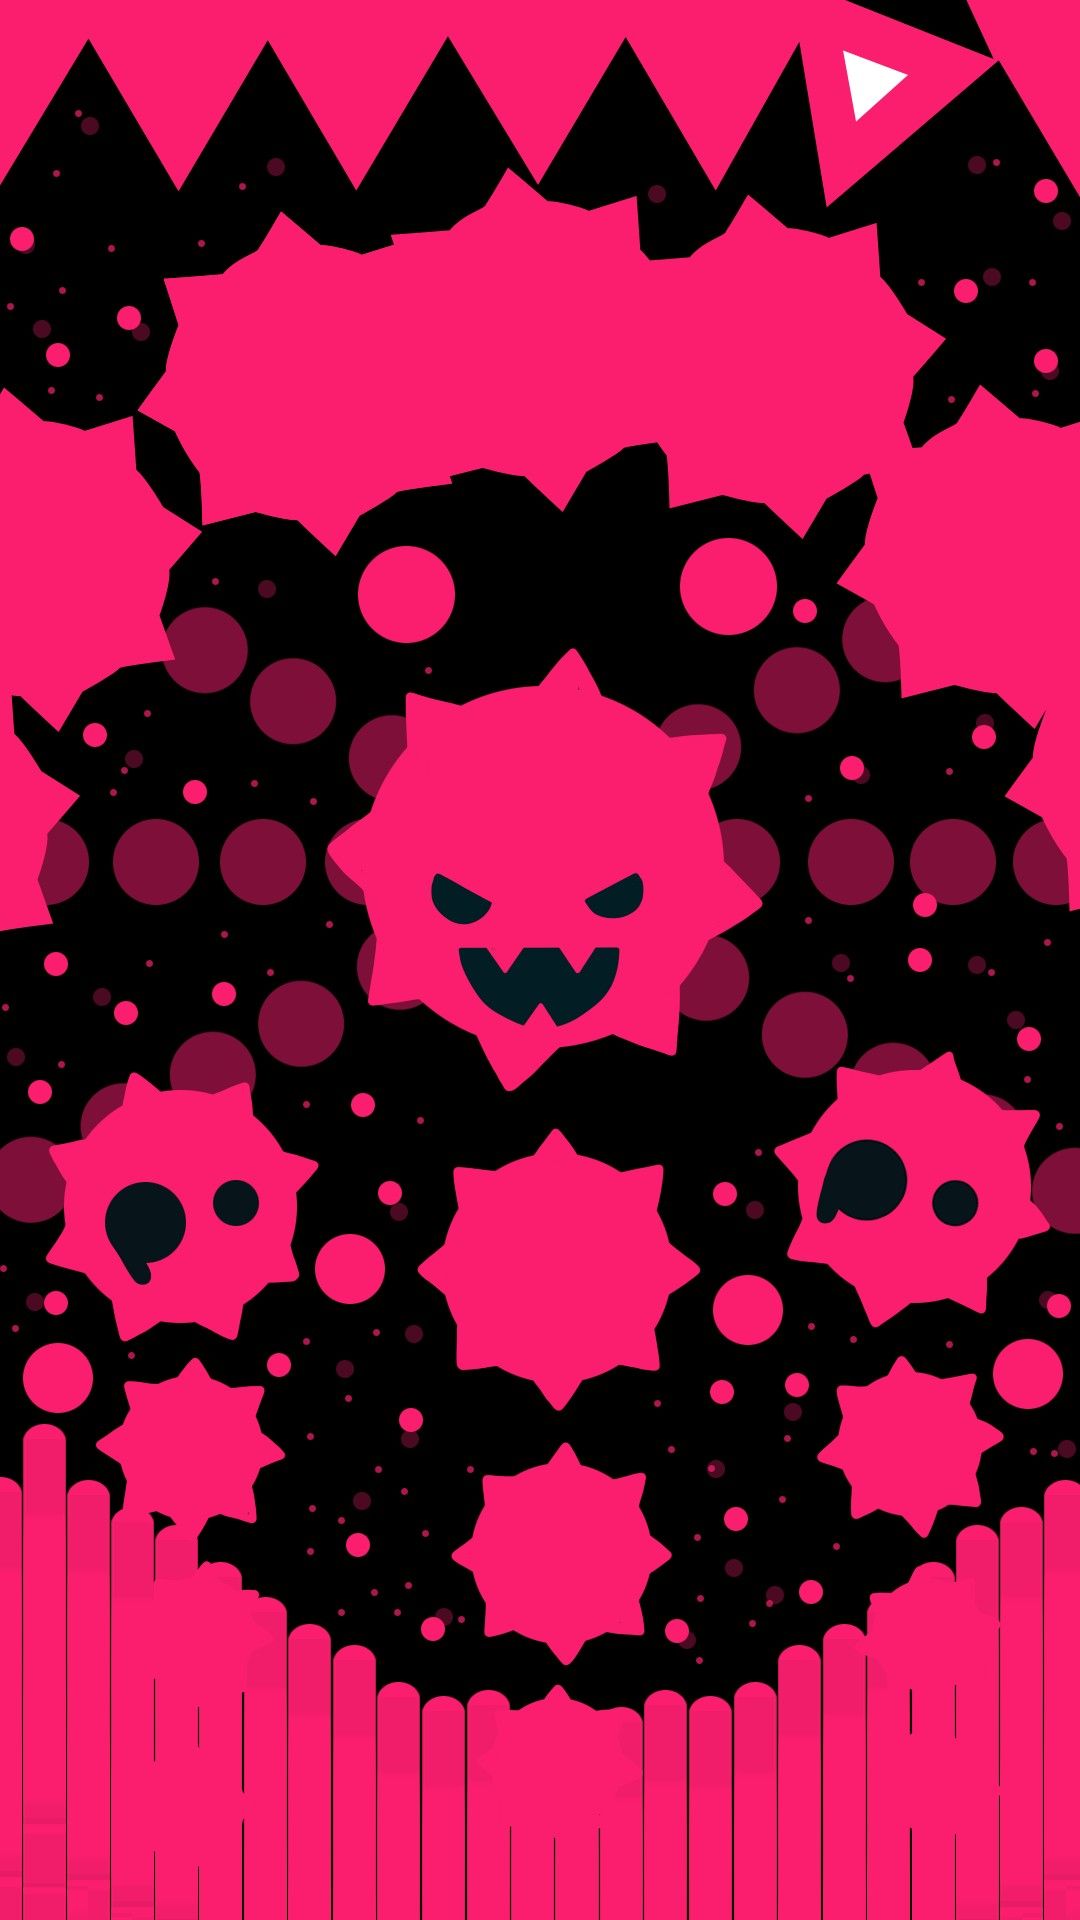 Just Shapes and Beats Wallpaper Free Just Shapes and Beats Background